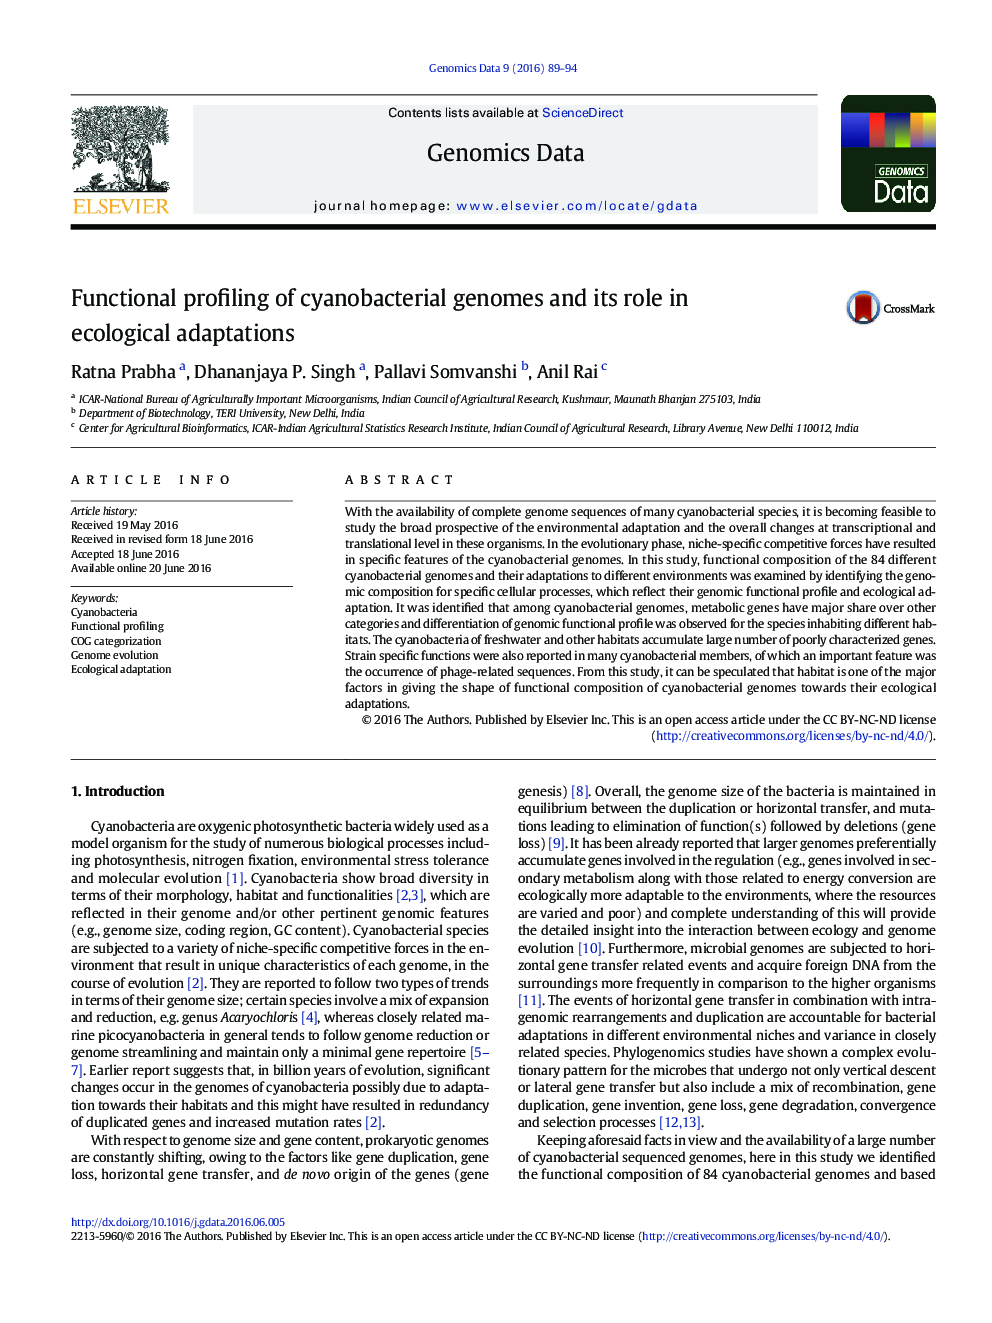 Functional profiling of cyanobacterial genomes and its role in ecological adaptations